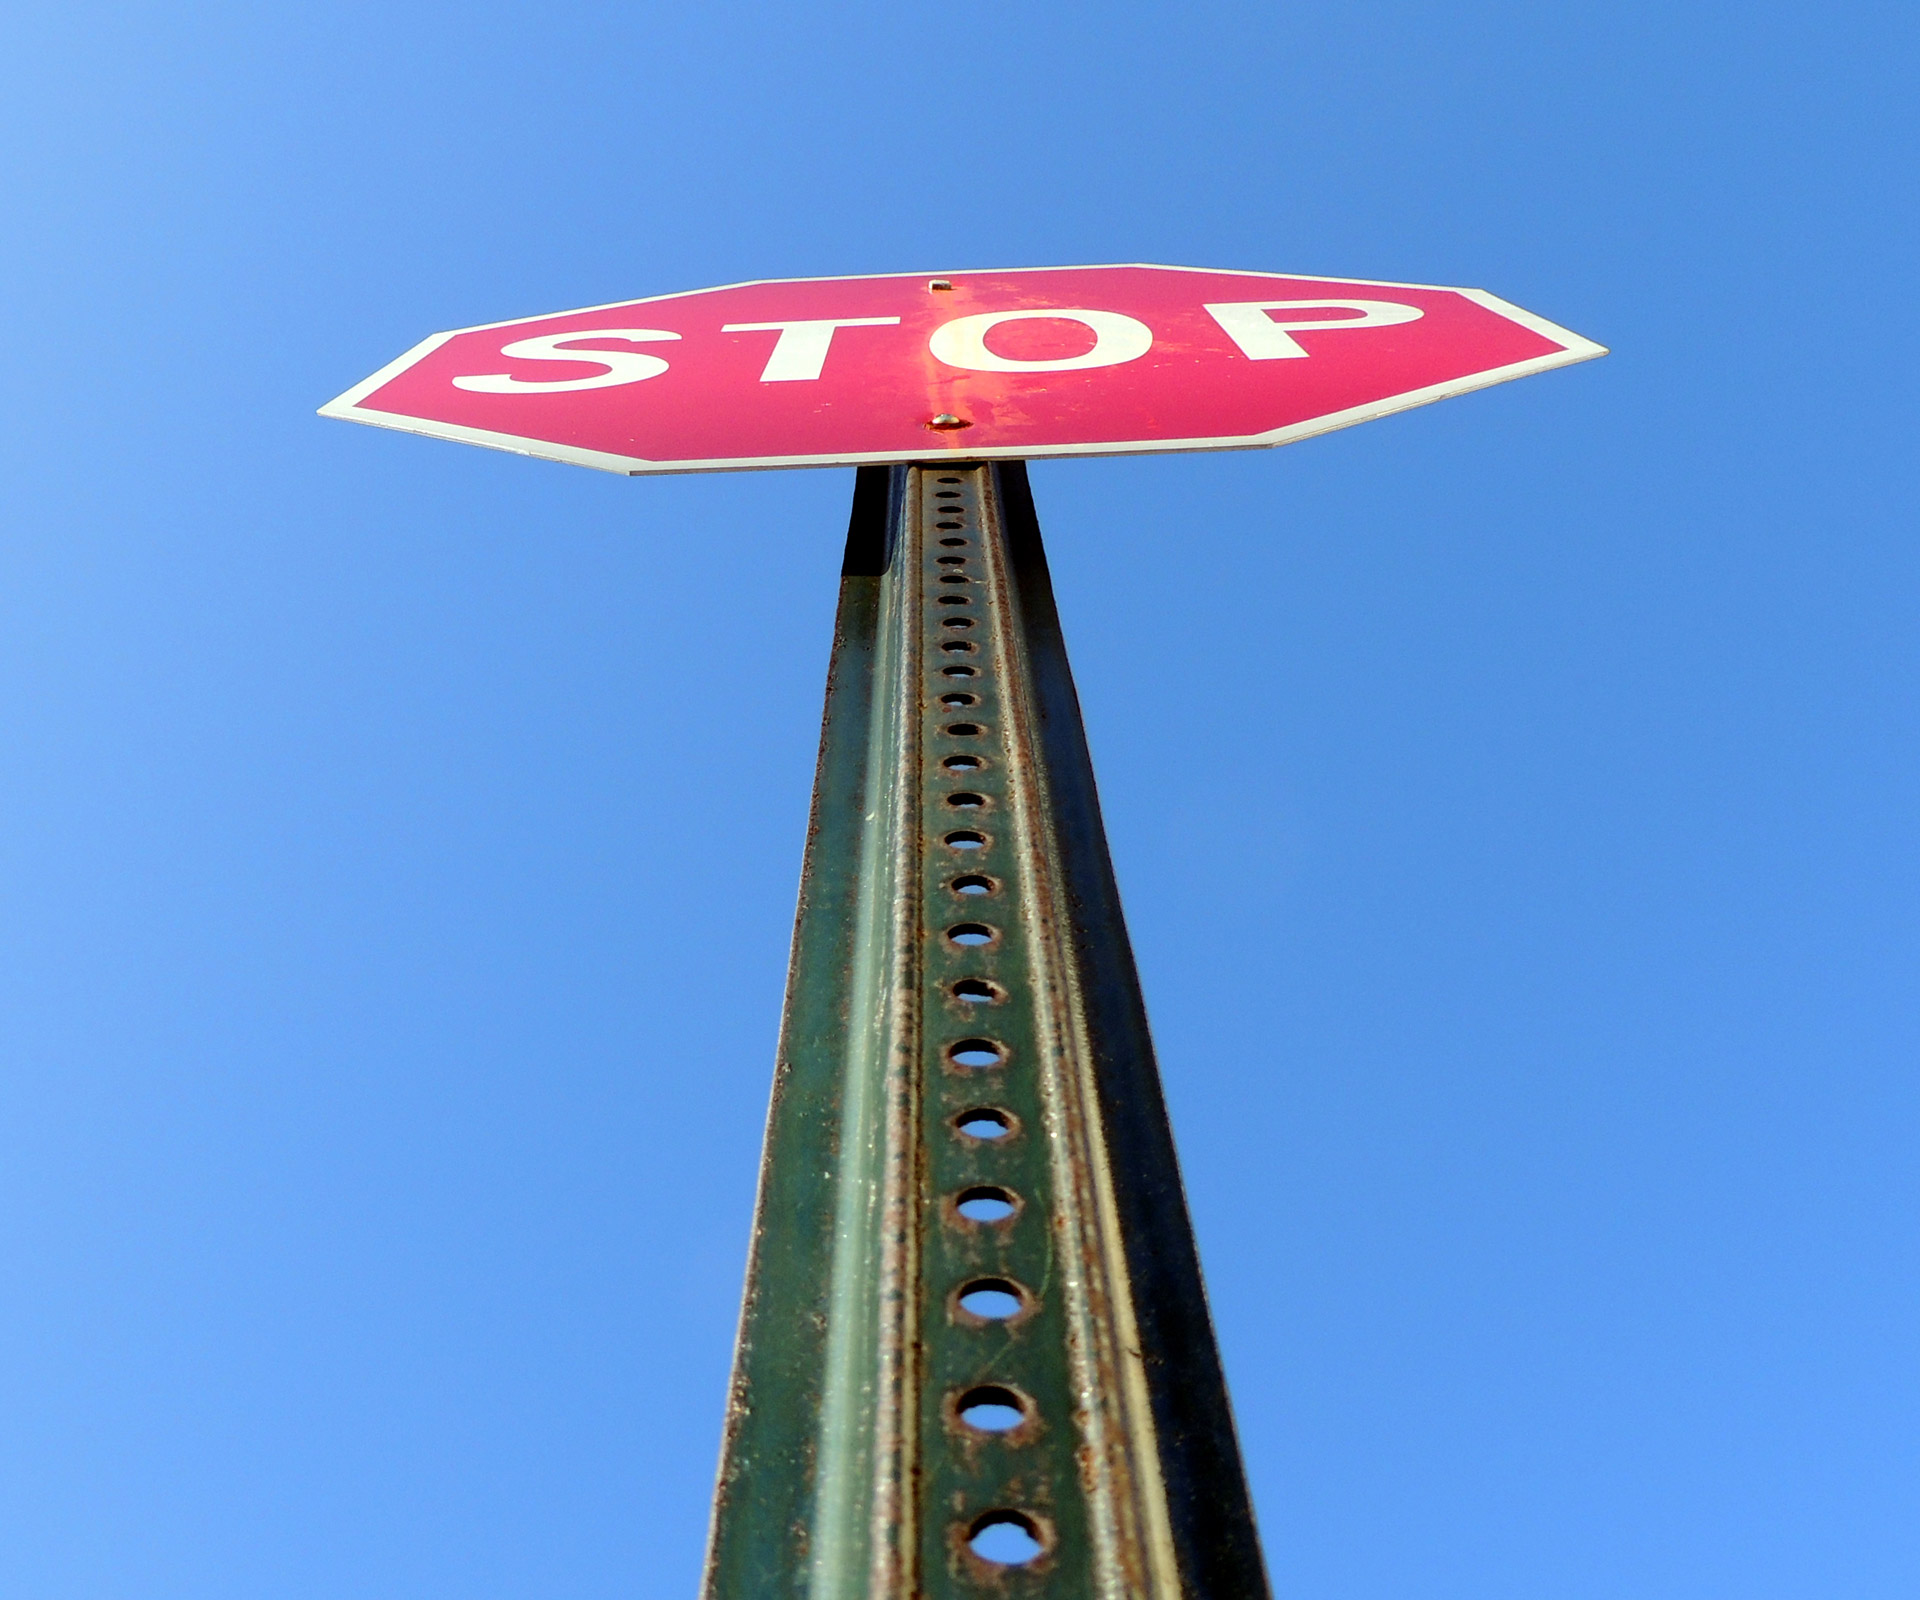 stop sign red free photo